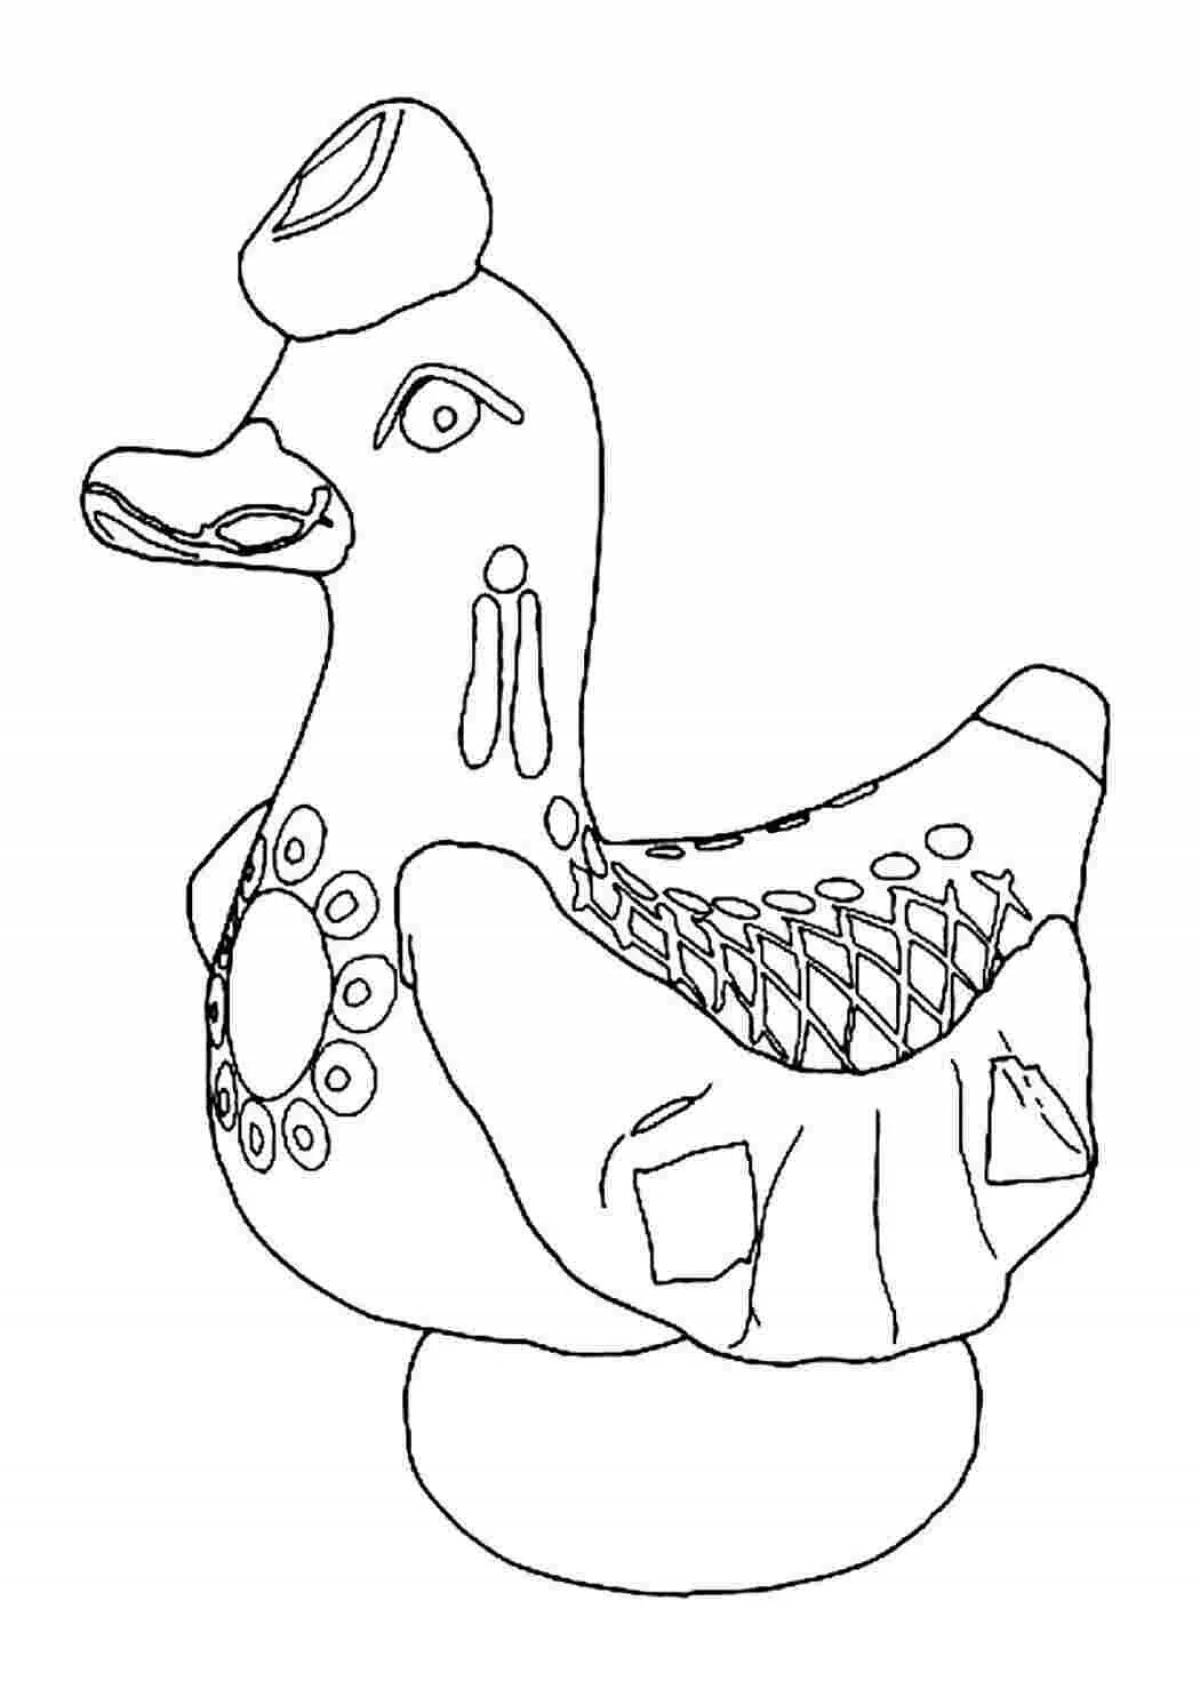 Adorable duck coloring book for kids